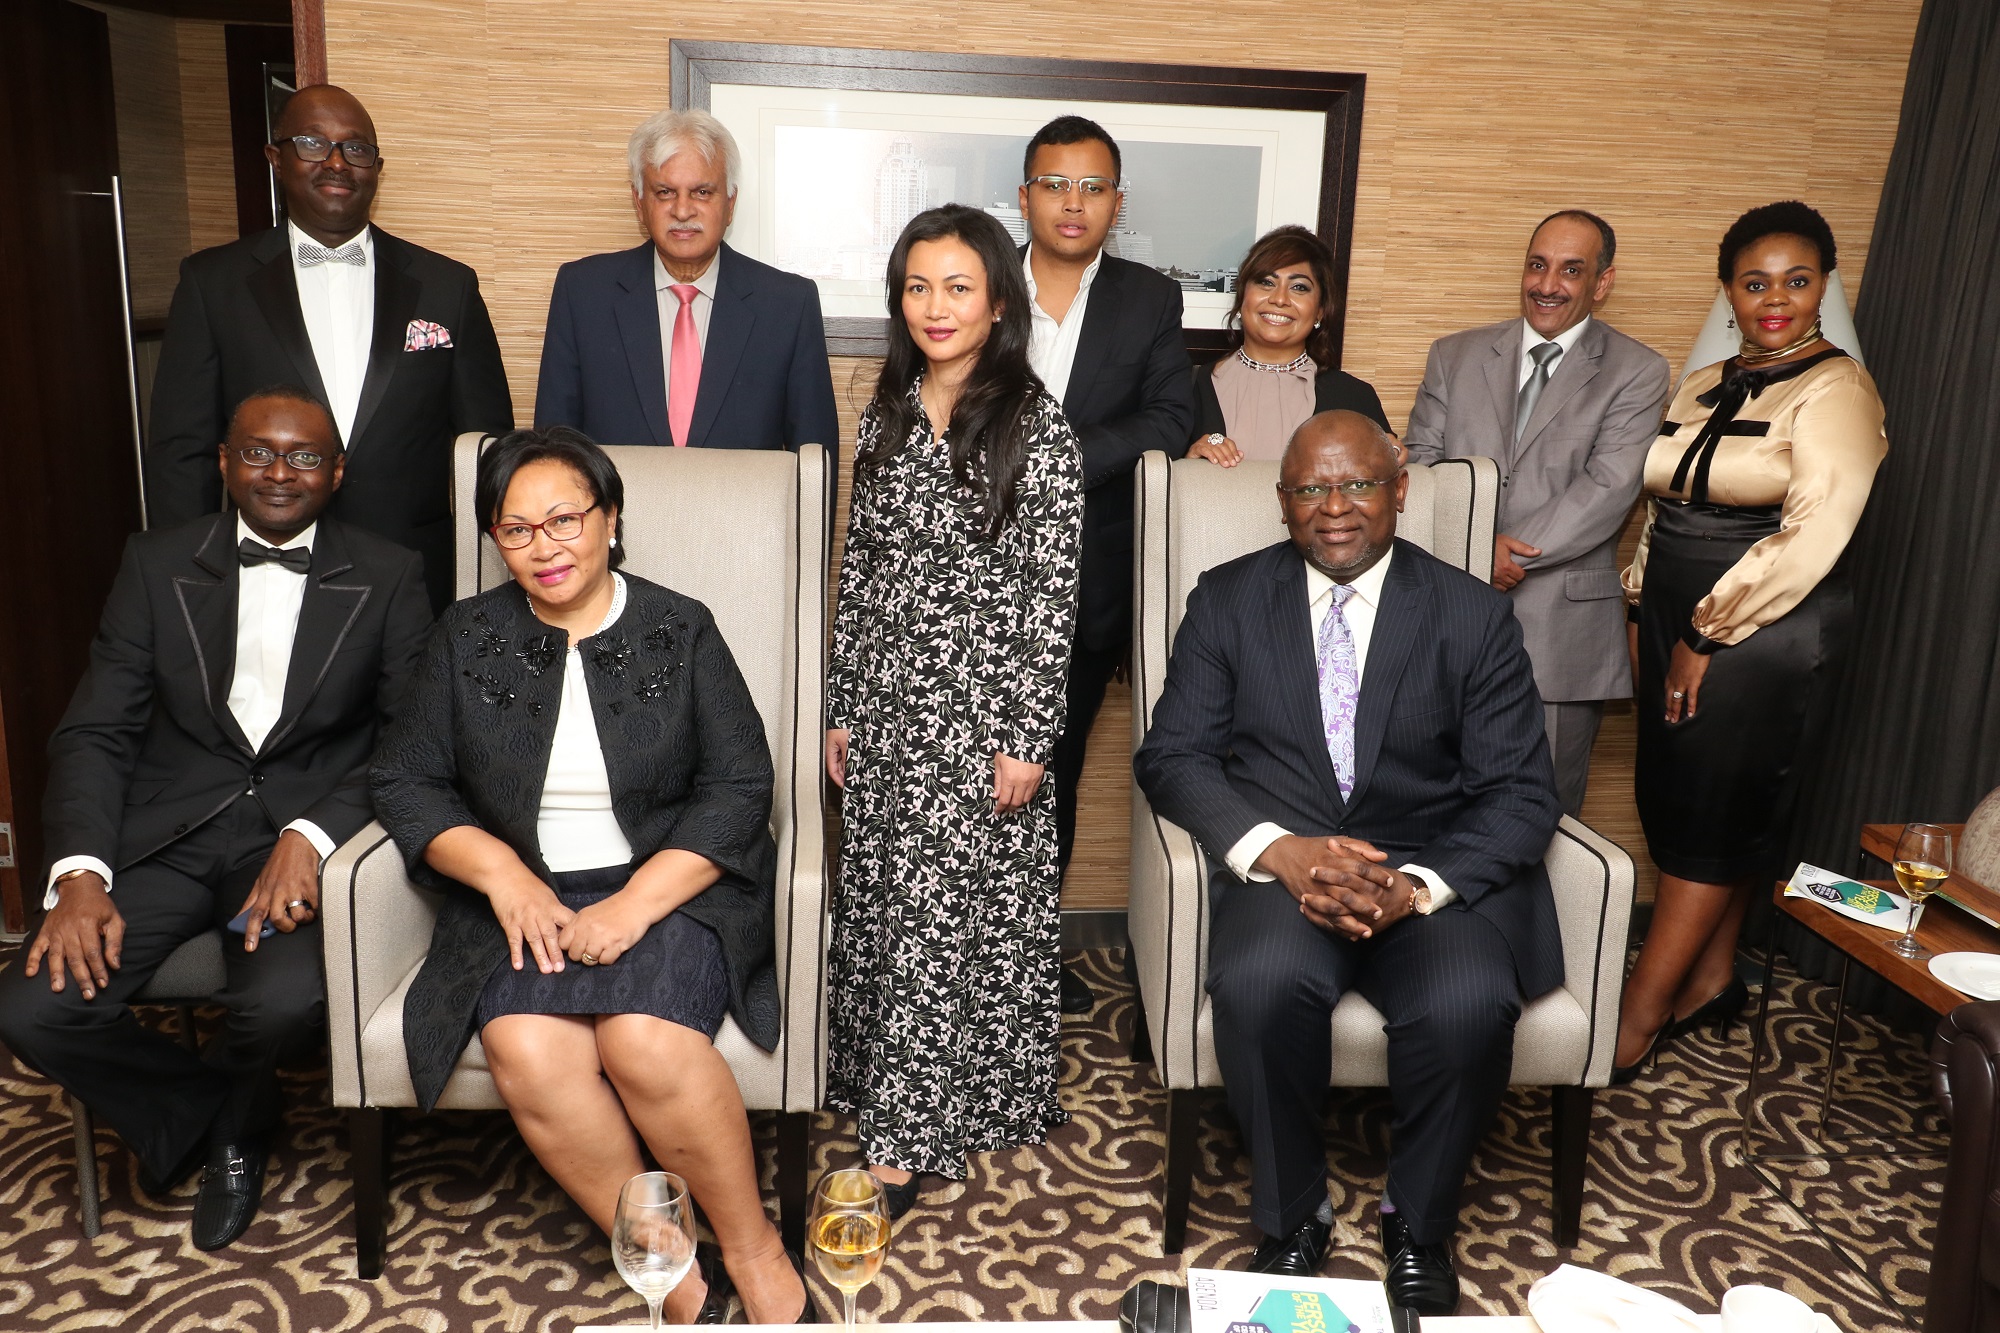 FORMER PRESIDENT OF MADAGASCAR, 25 CEOS RECEIVE AFRICAN LEADERSHIP AWARDS … INDUCTED INTO CEOS HALL OF FAME